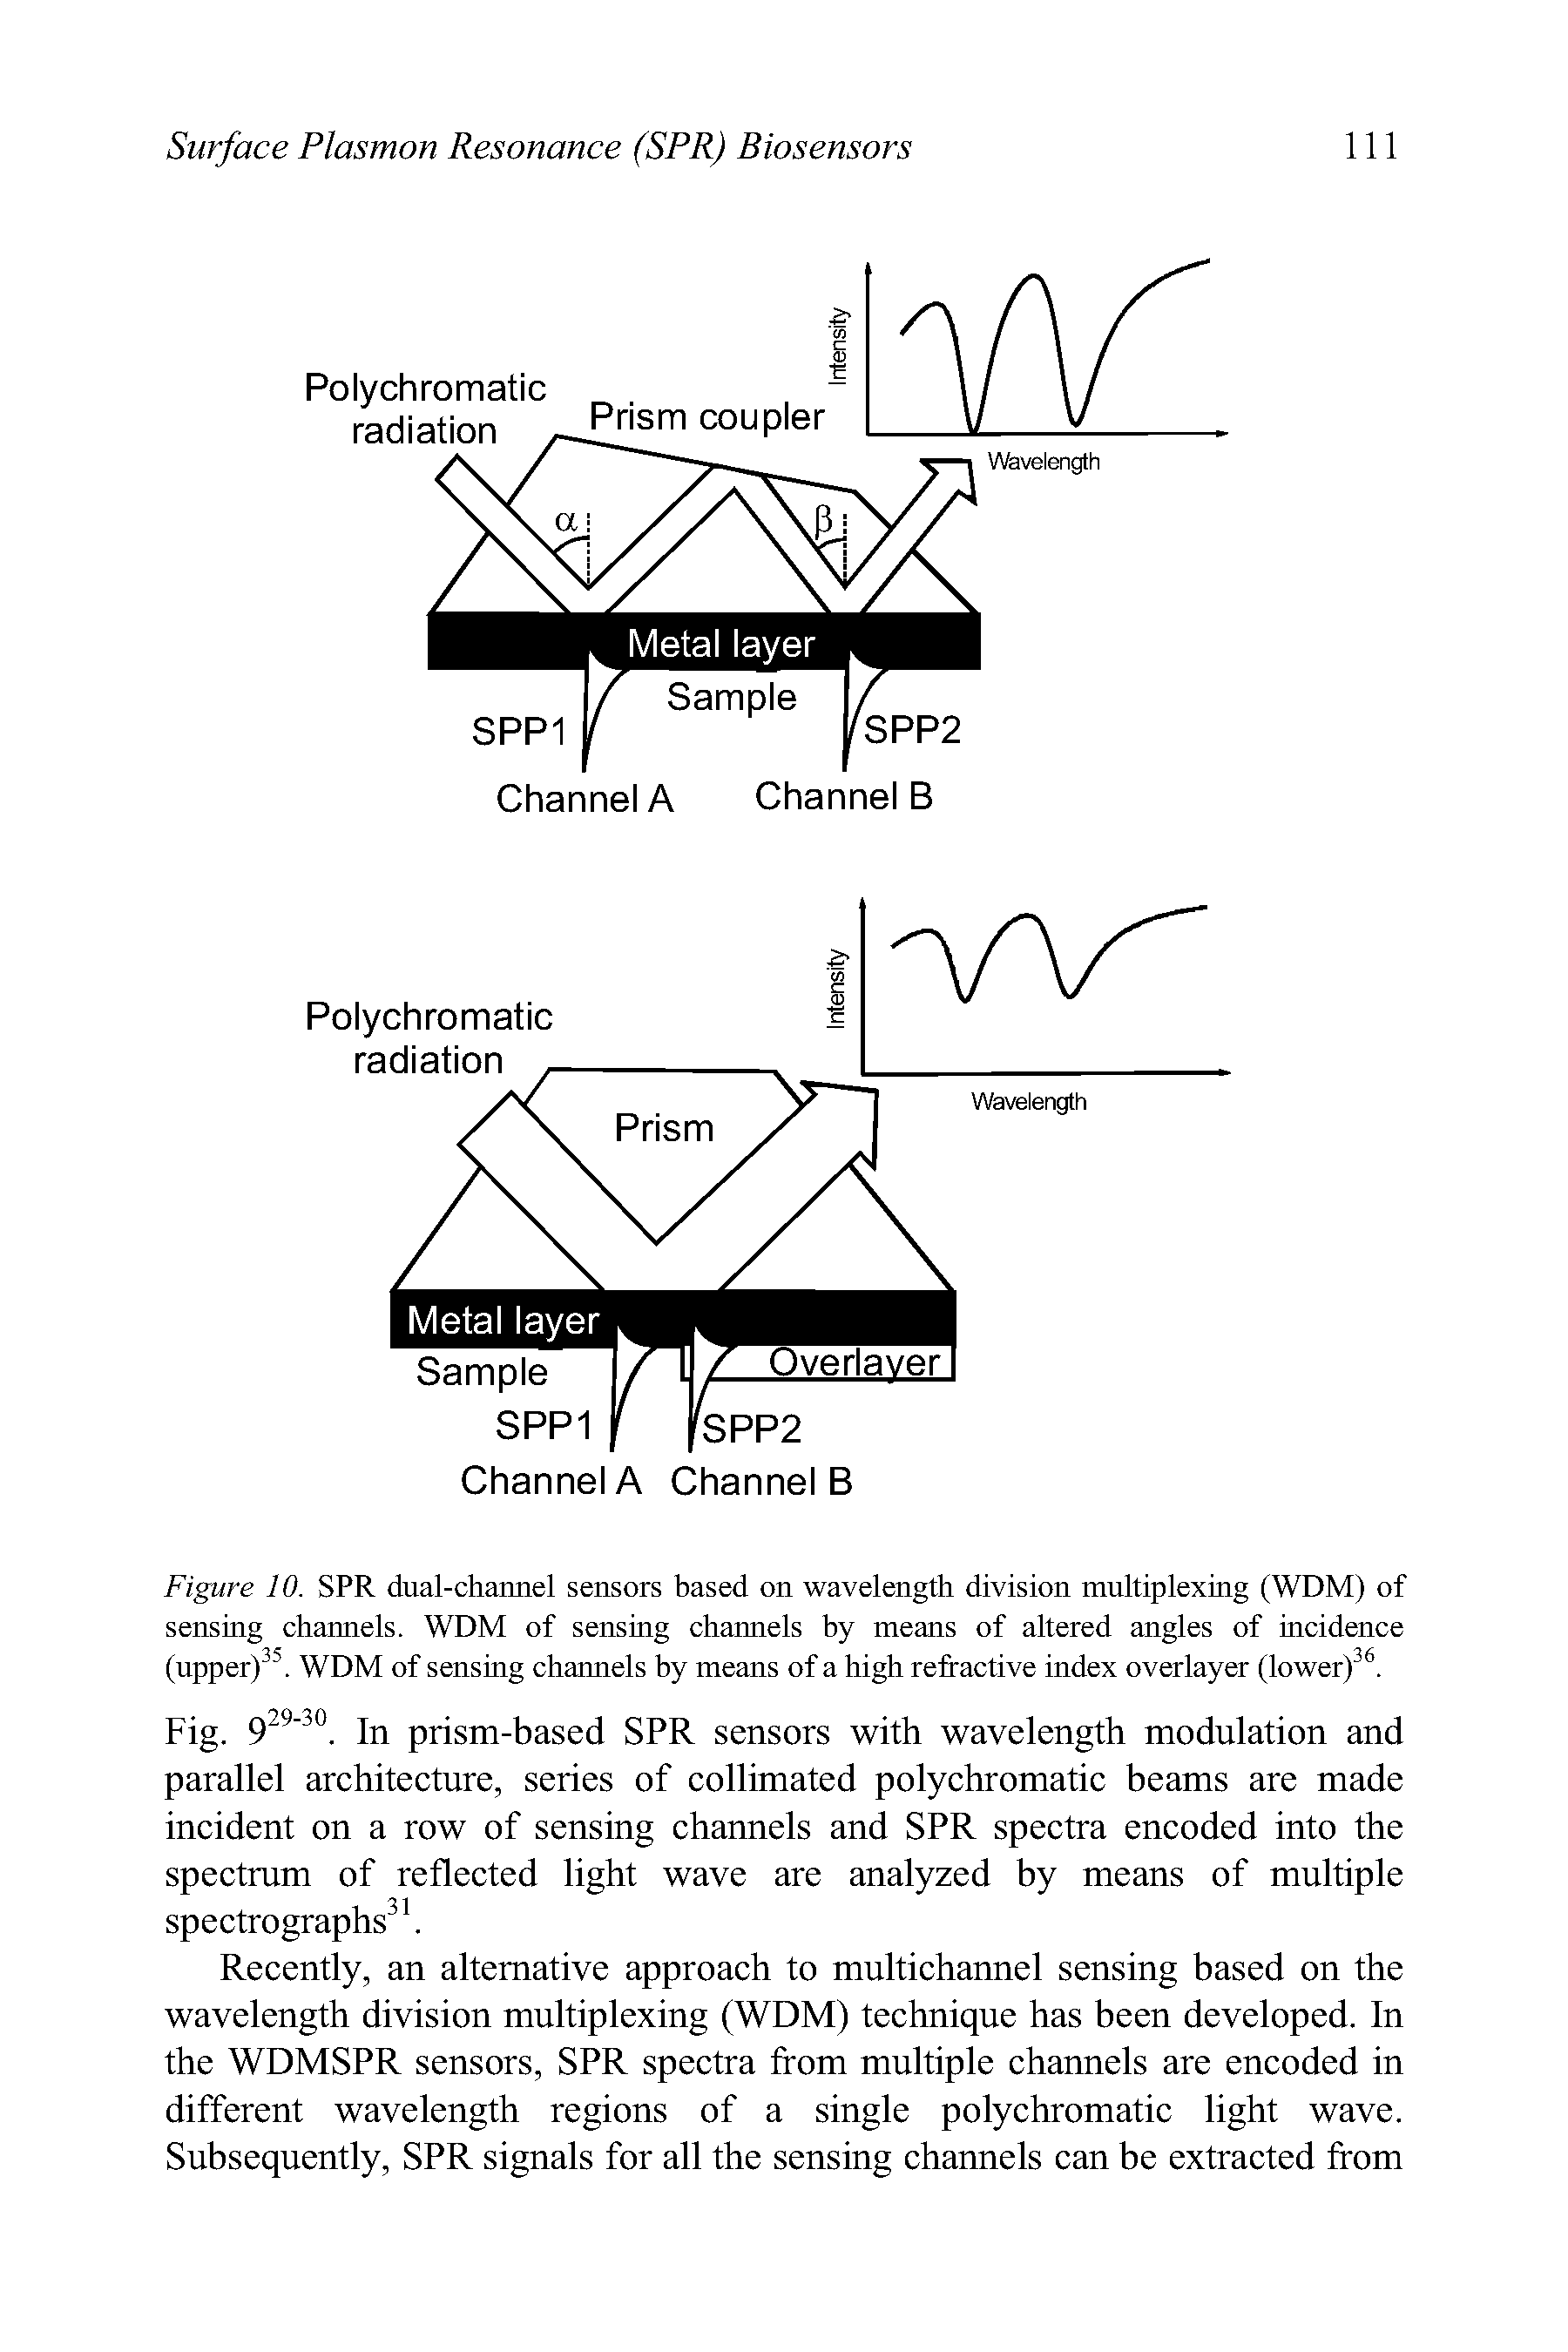 Figure 10. SPR dual-channel sensors based on wavelength division multiplexing (WDM) of sensing channels. WDM of sensing channels by means of altered angles of incidence (upper). WDM of sensing channels by means of a high refractive index overlayer (lower) .